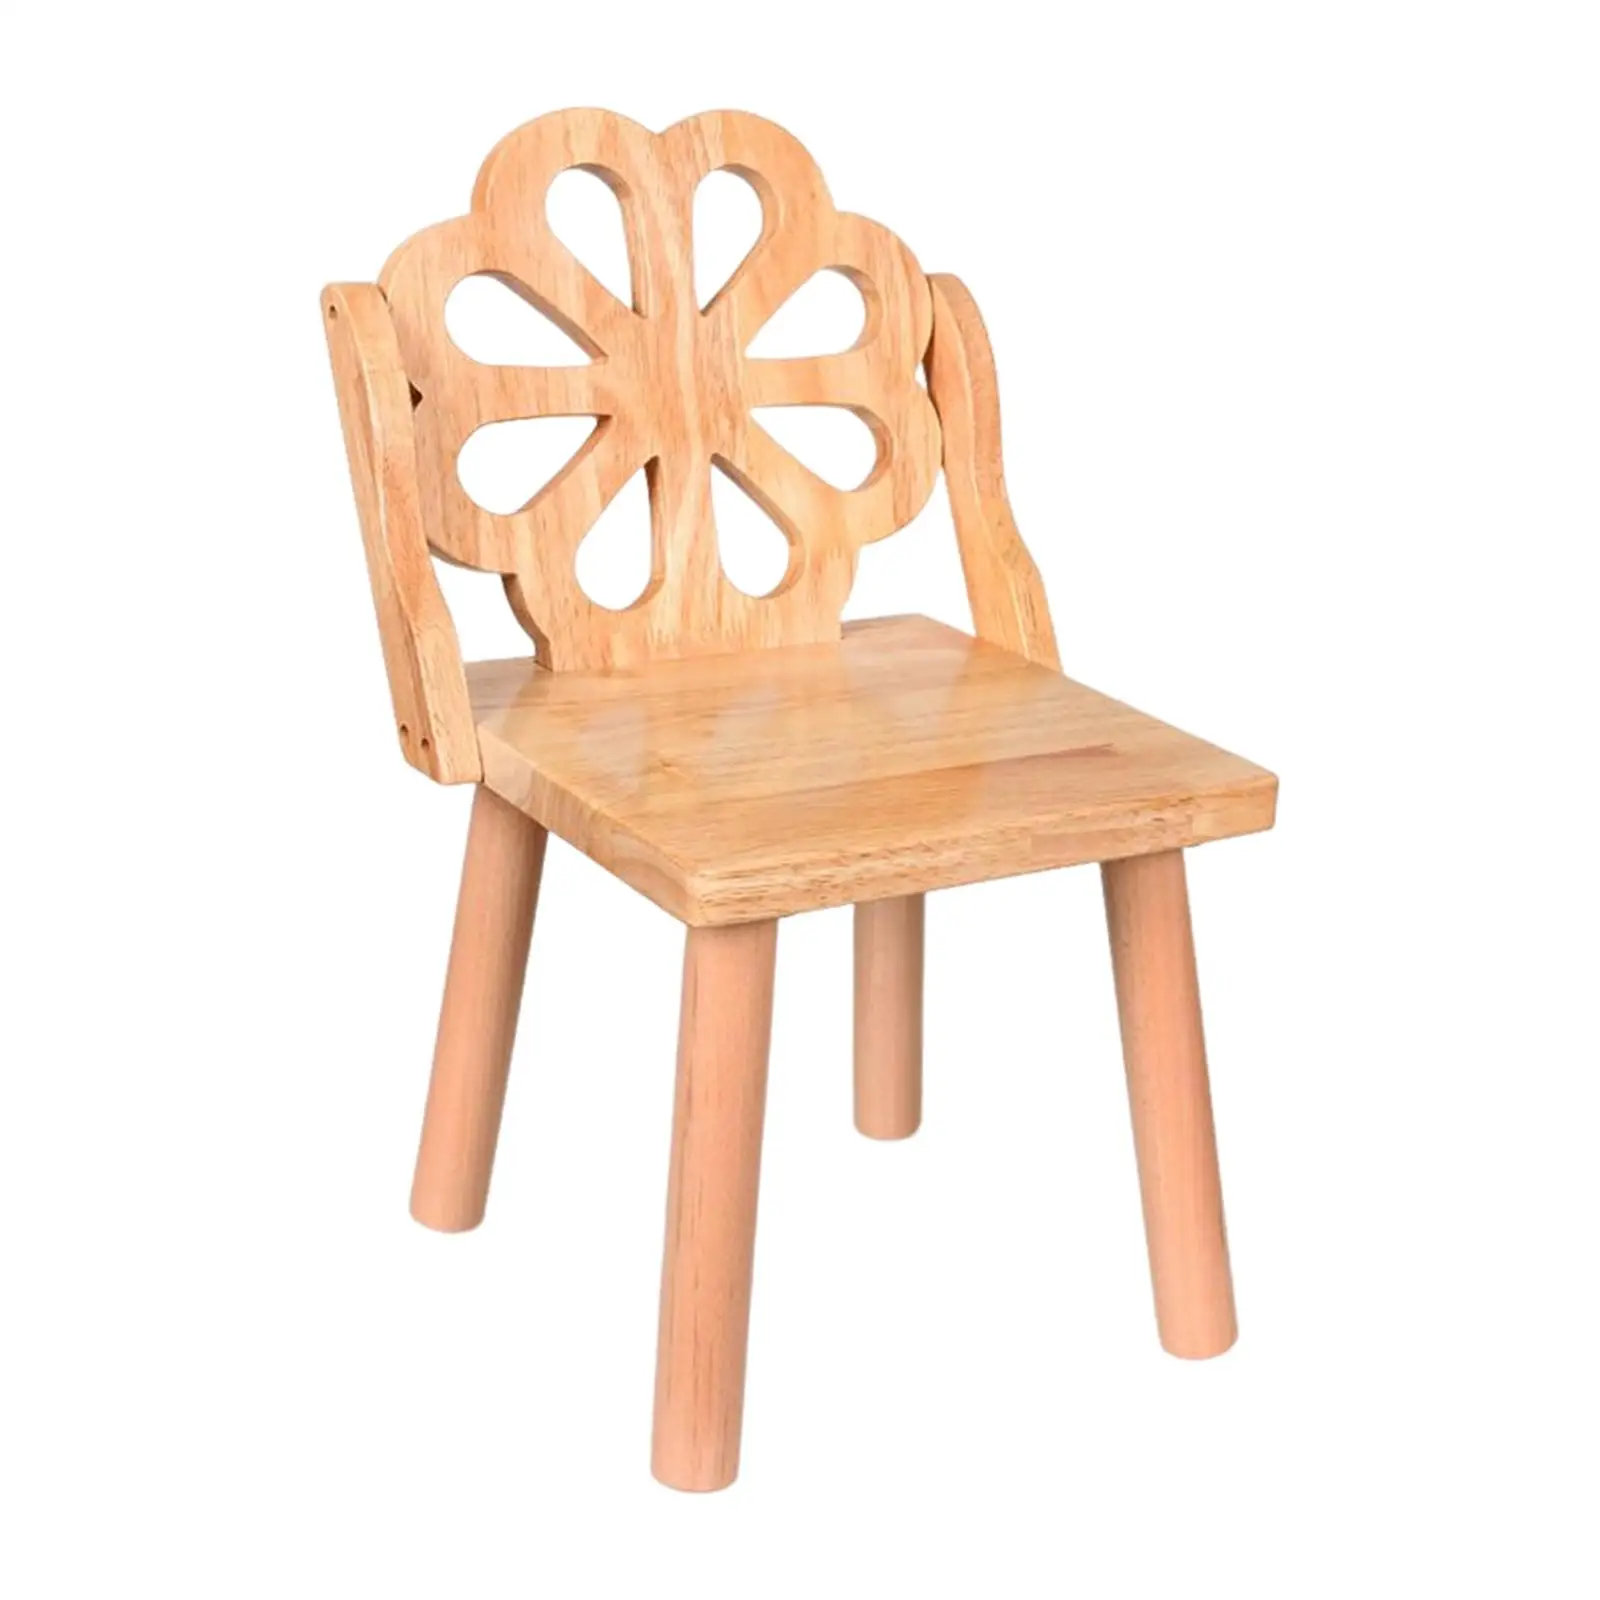 Household Removable Wooden Child Stool Wood High Chair Heavy Duty Anti Slip Lightweight Wooden Toys for Children for Bathroom